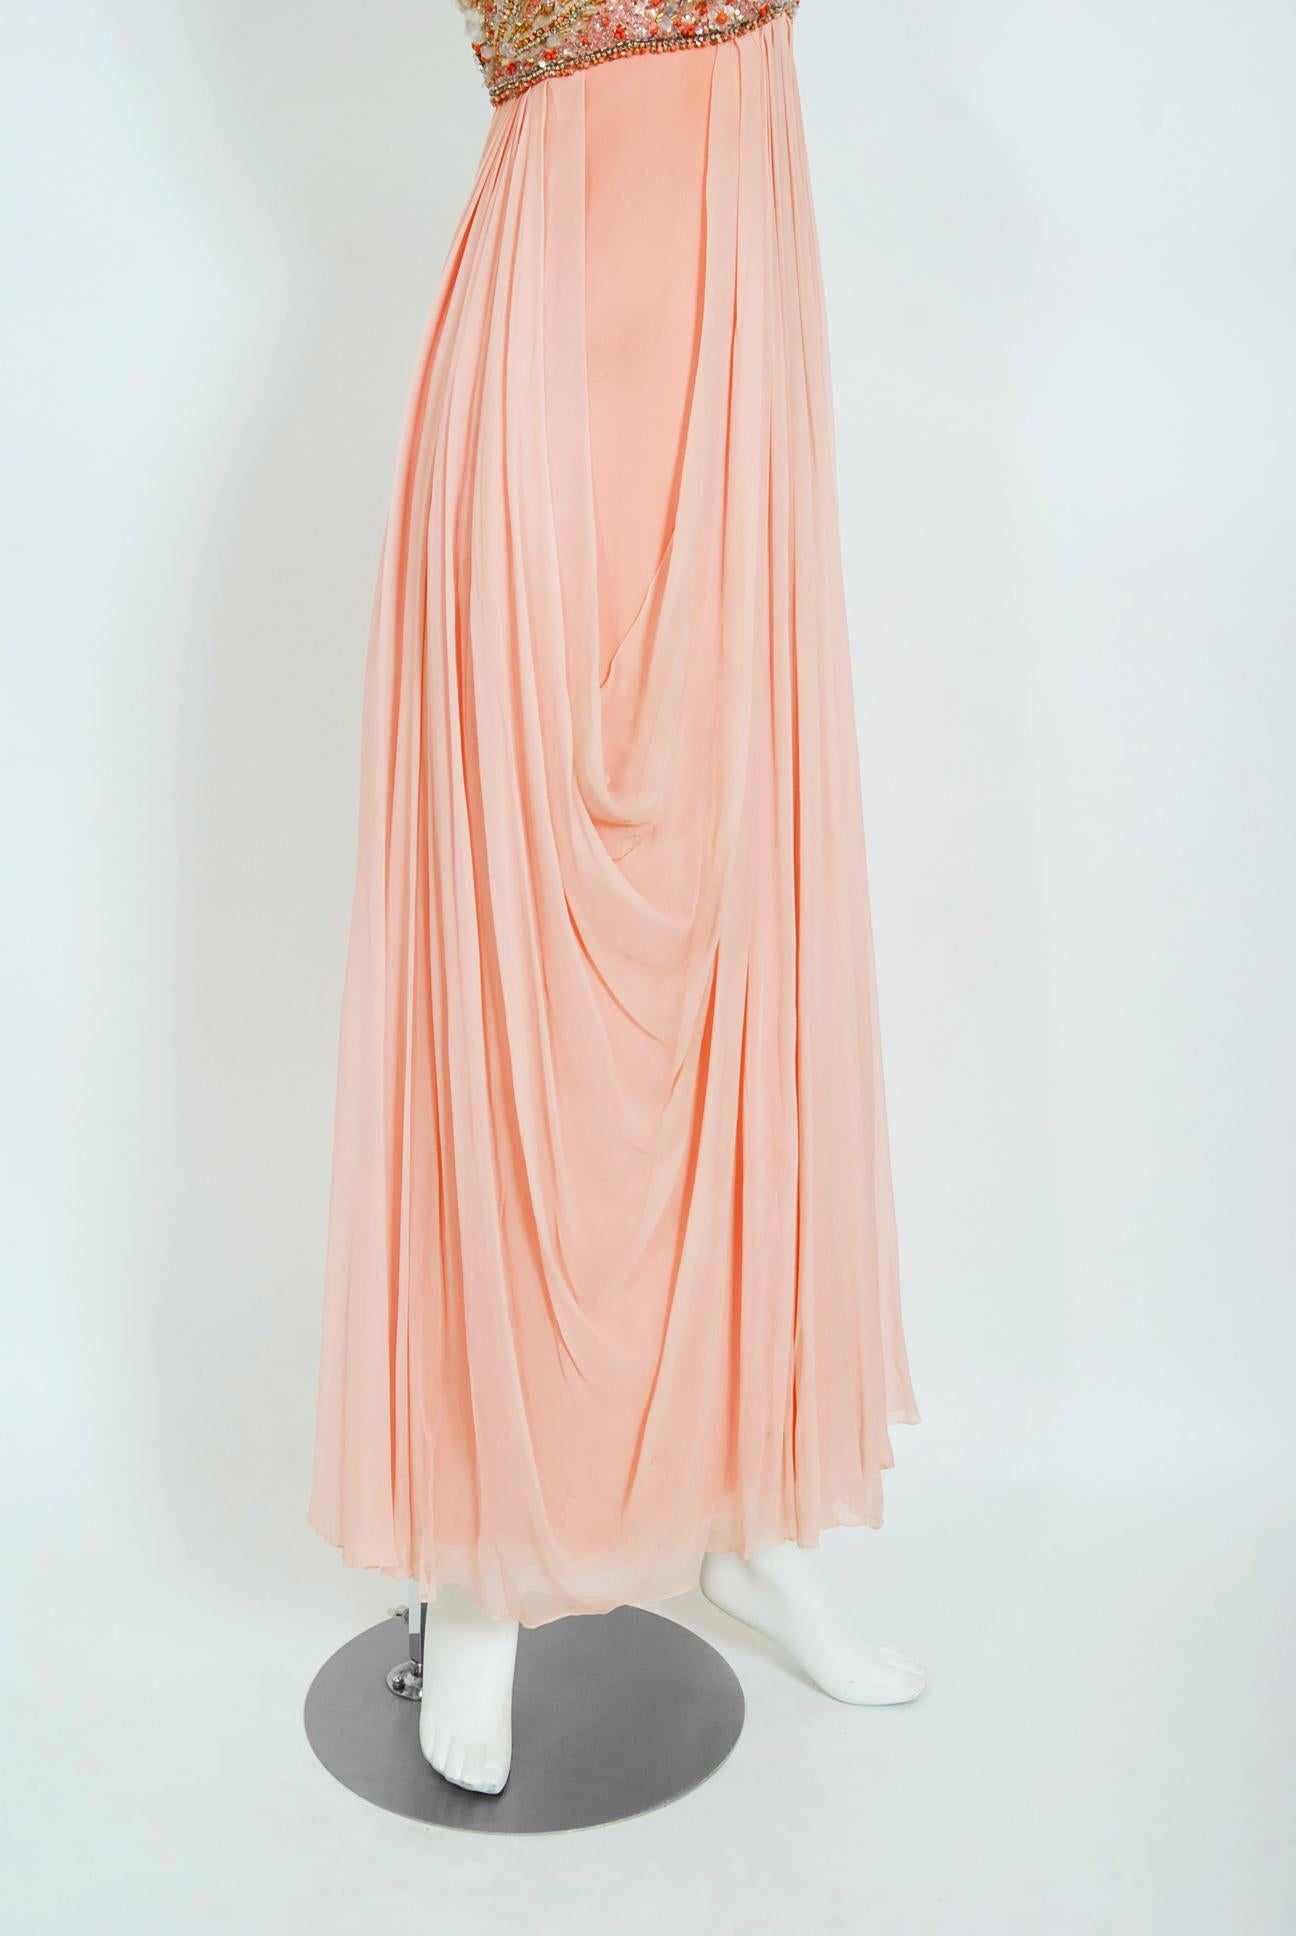 Vintage 1960's Helen Rose Beaded Champagne Pink Silk-Chiffon Draped Goddess Gown 1